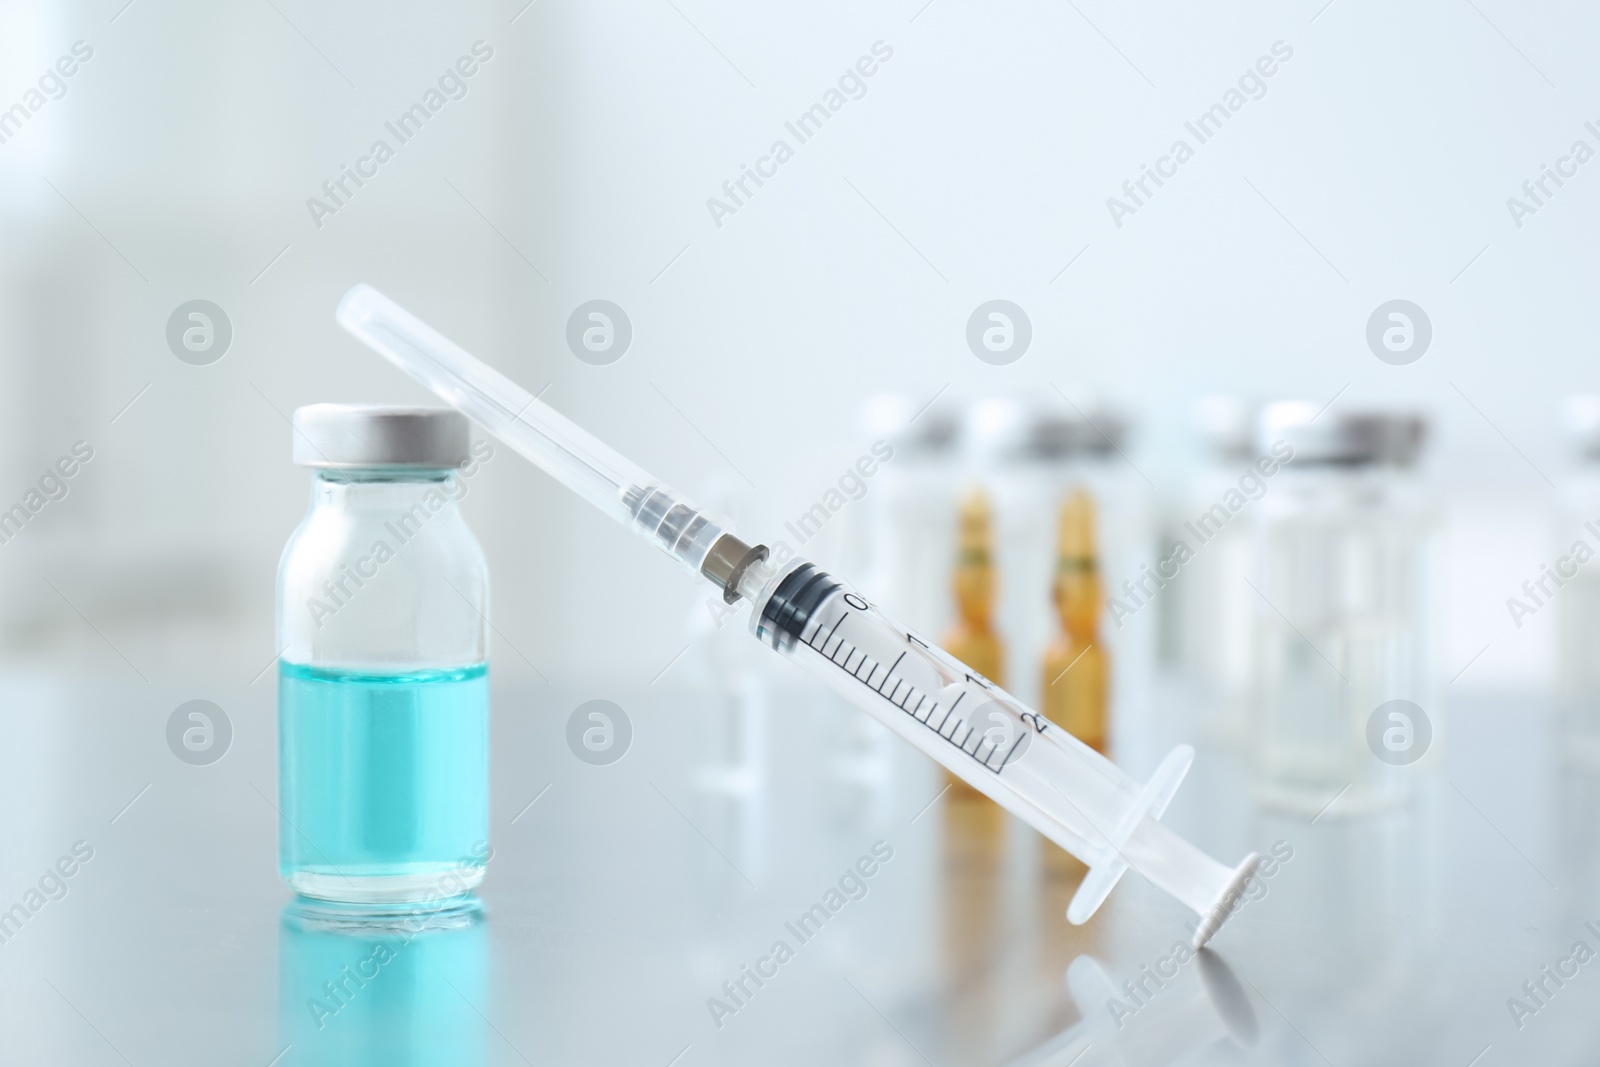 Photo of Syringe with vial of medicine on table